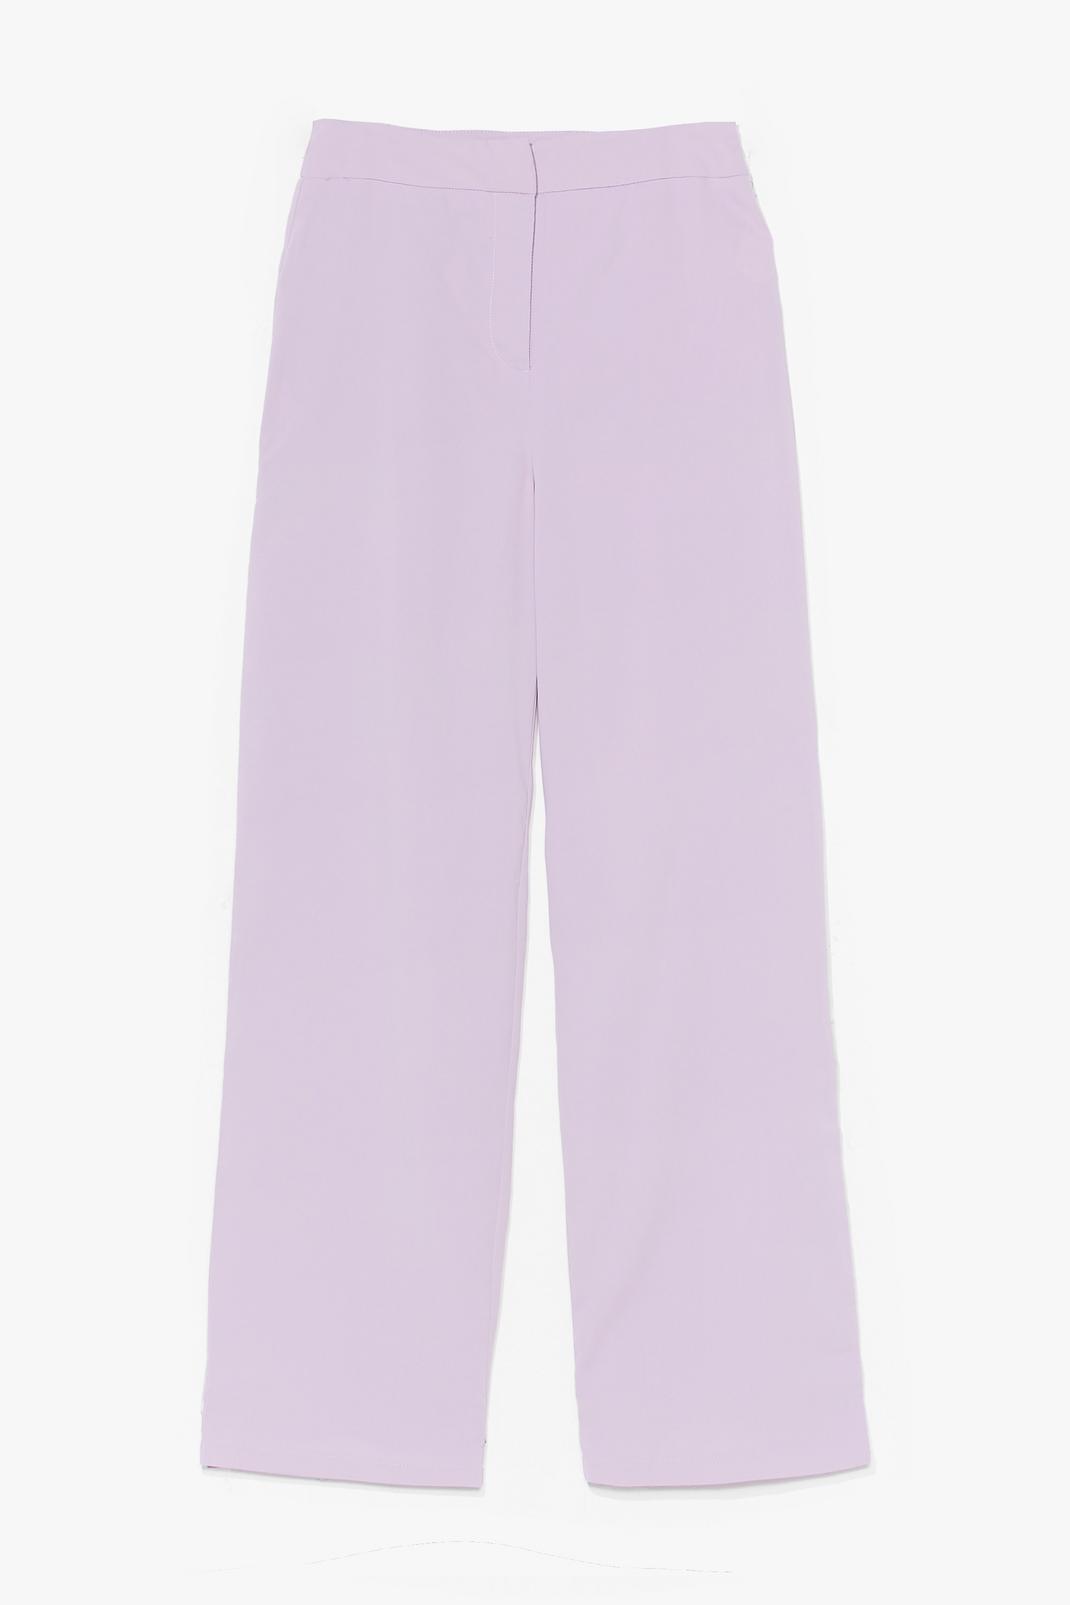 Lilac Let's Not Waist Time High-Waisted Trousers image number 1